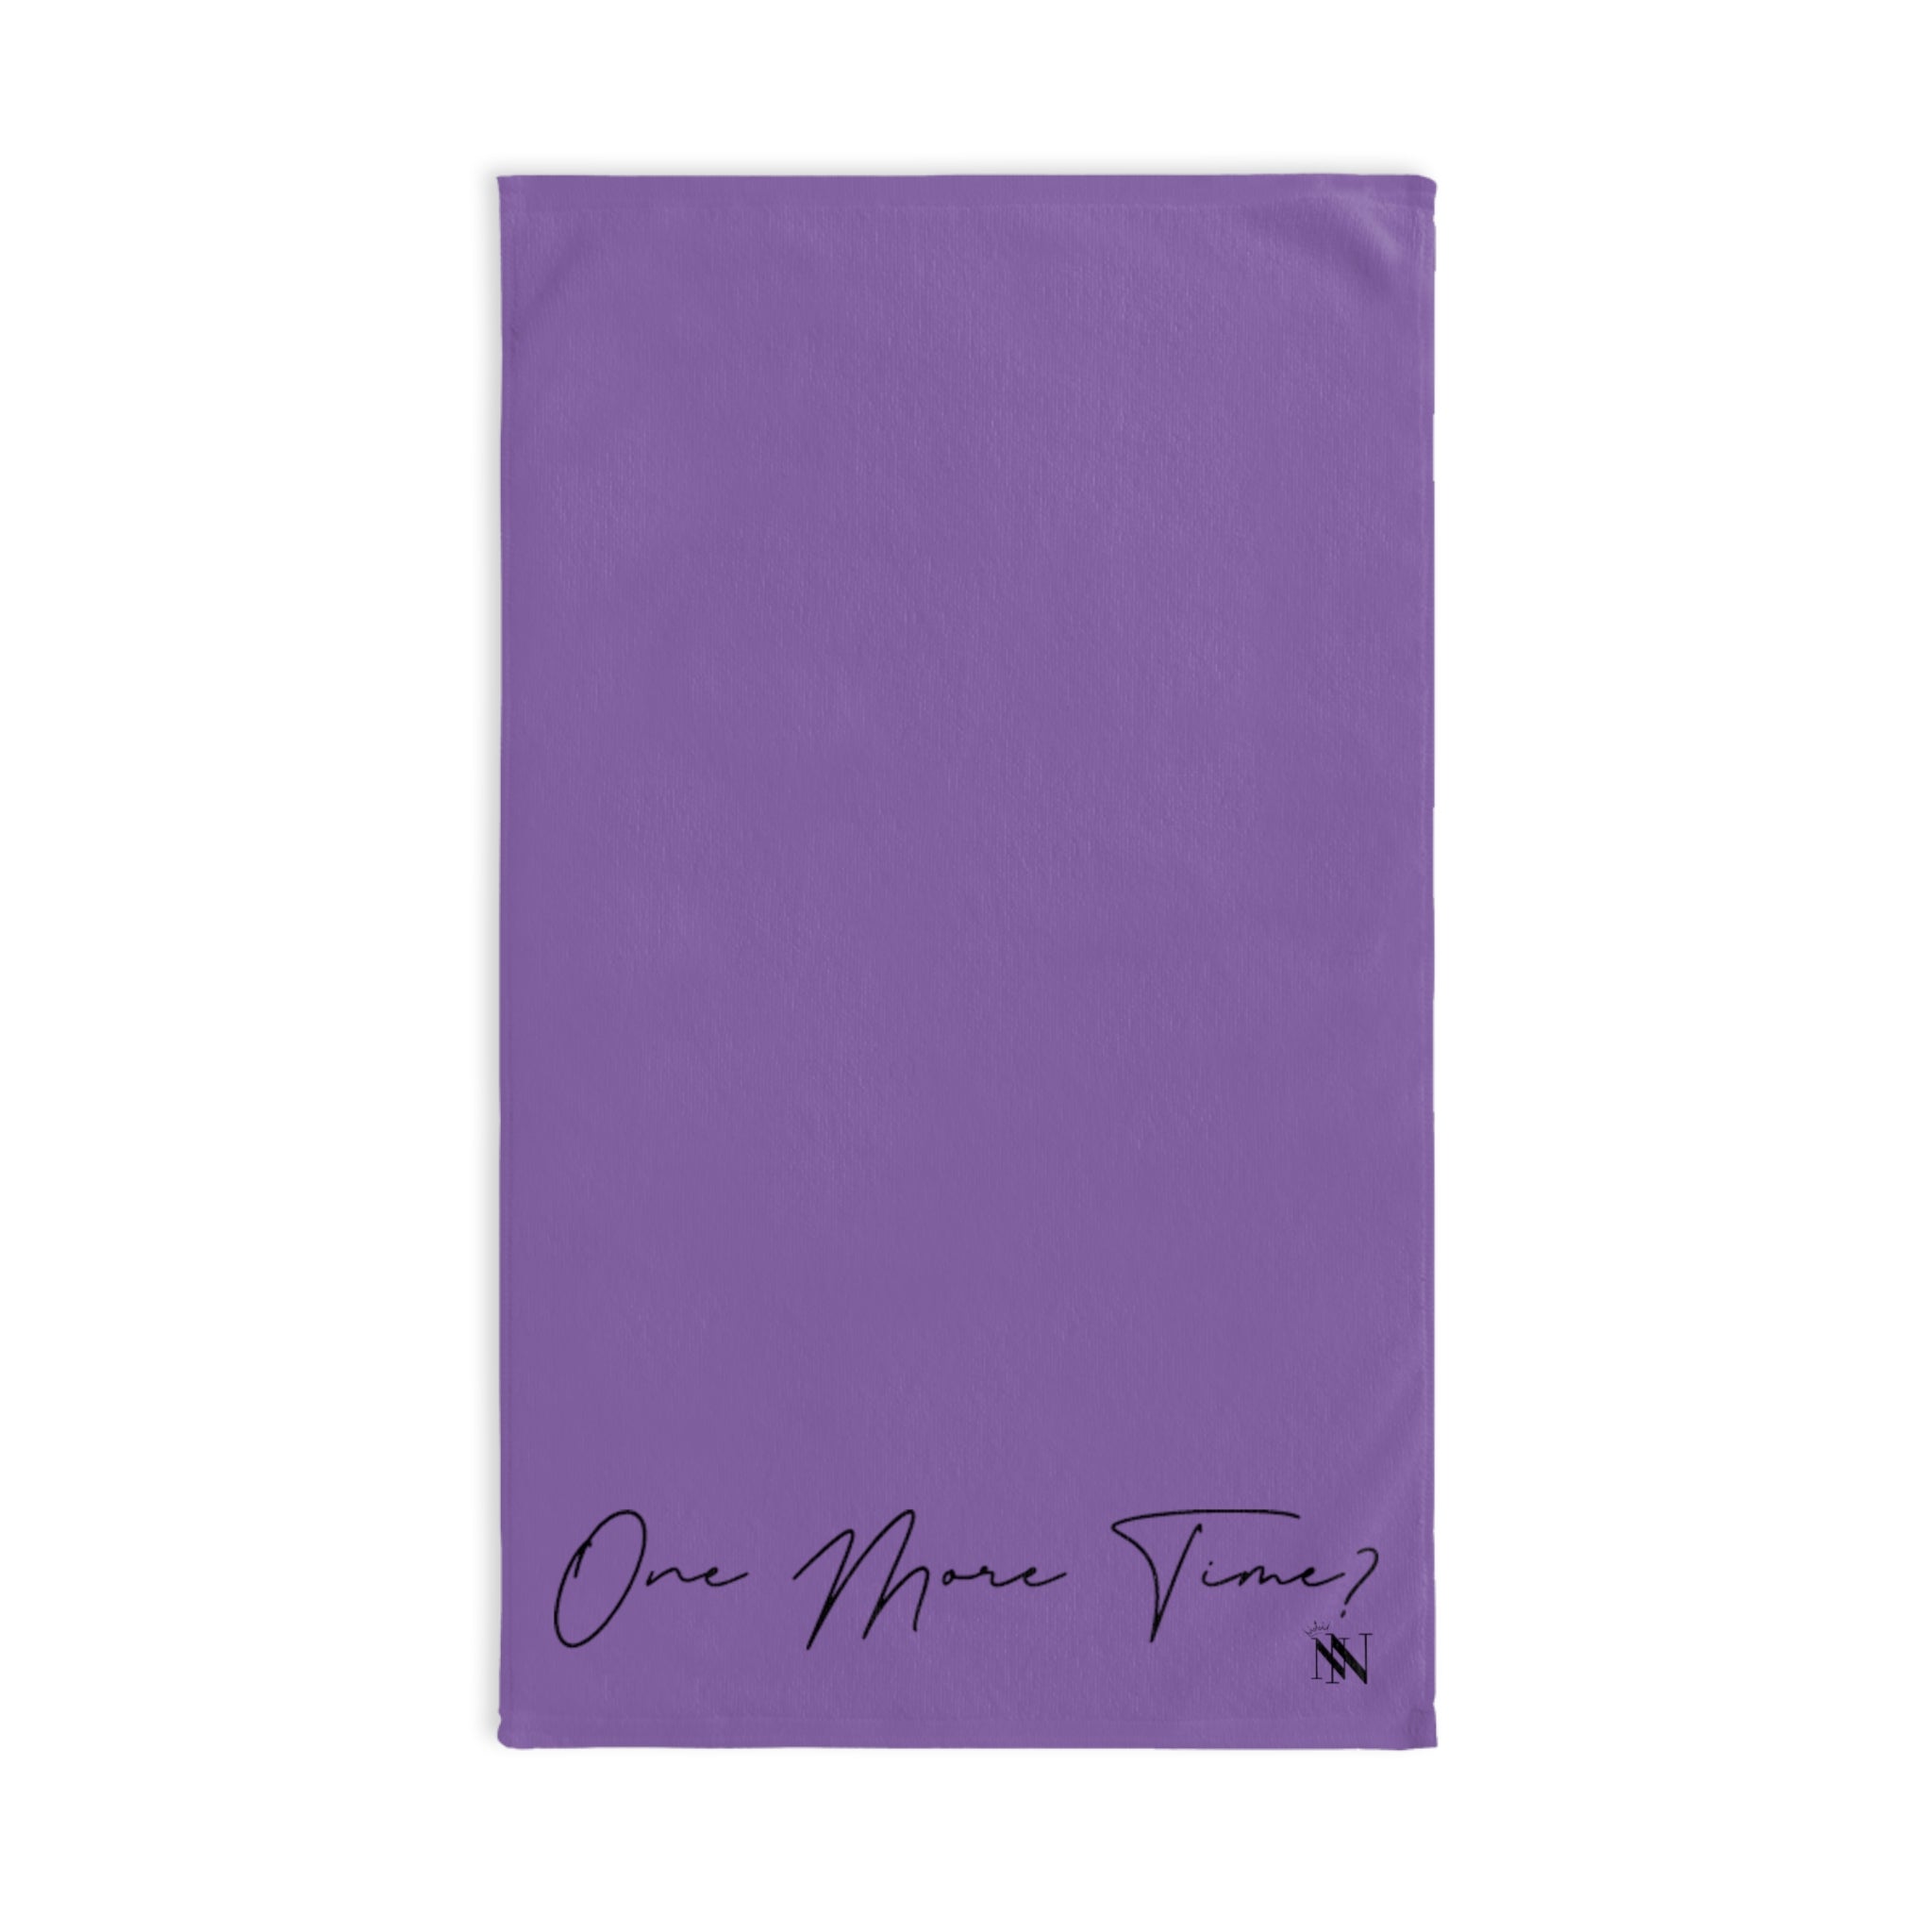 One More Time? Lavendar | Funny Gifts for Men - Gifts for Him - Birthday Gifts for Men, Him, Husband, Boyfriend, New Couple Gifts, Fathers & Valentines Day Gifts, Hand Towels NECTAR NAPKINS